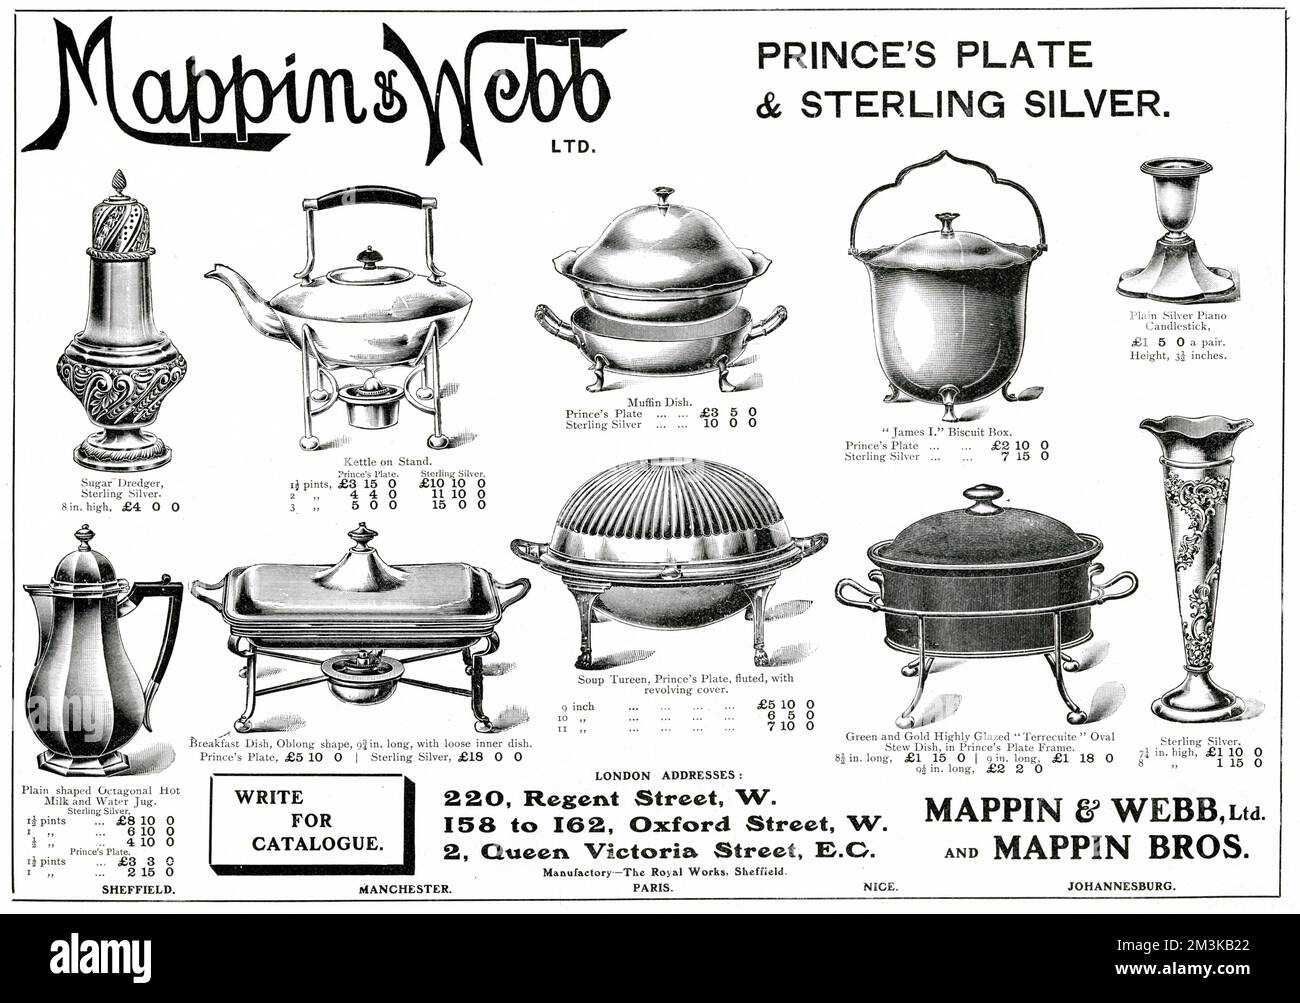 Selection of Prince's plate and sterling silver items from 1907. Stock Photo